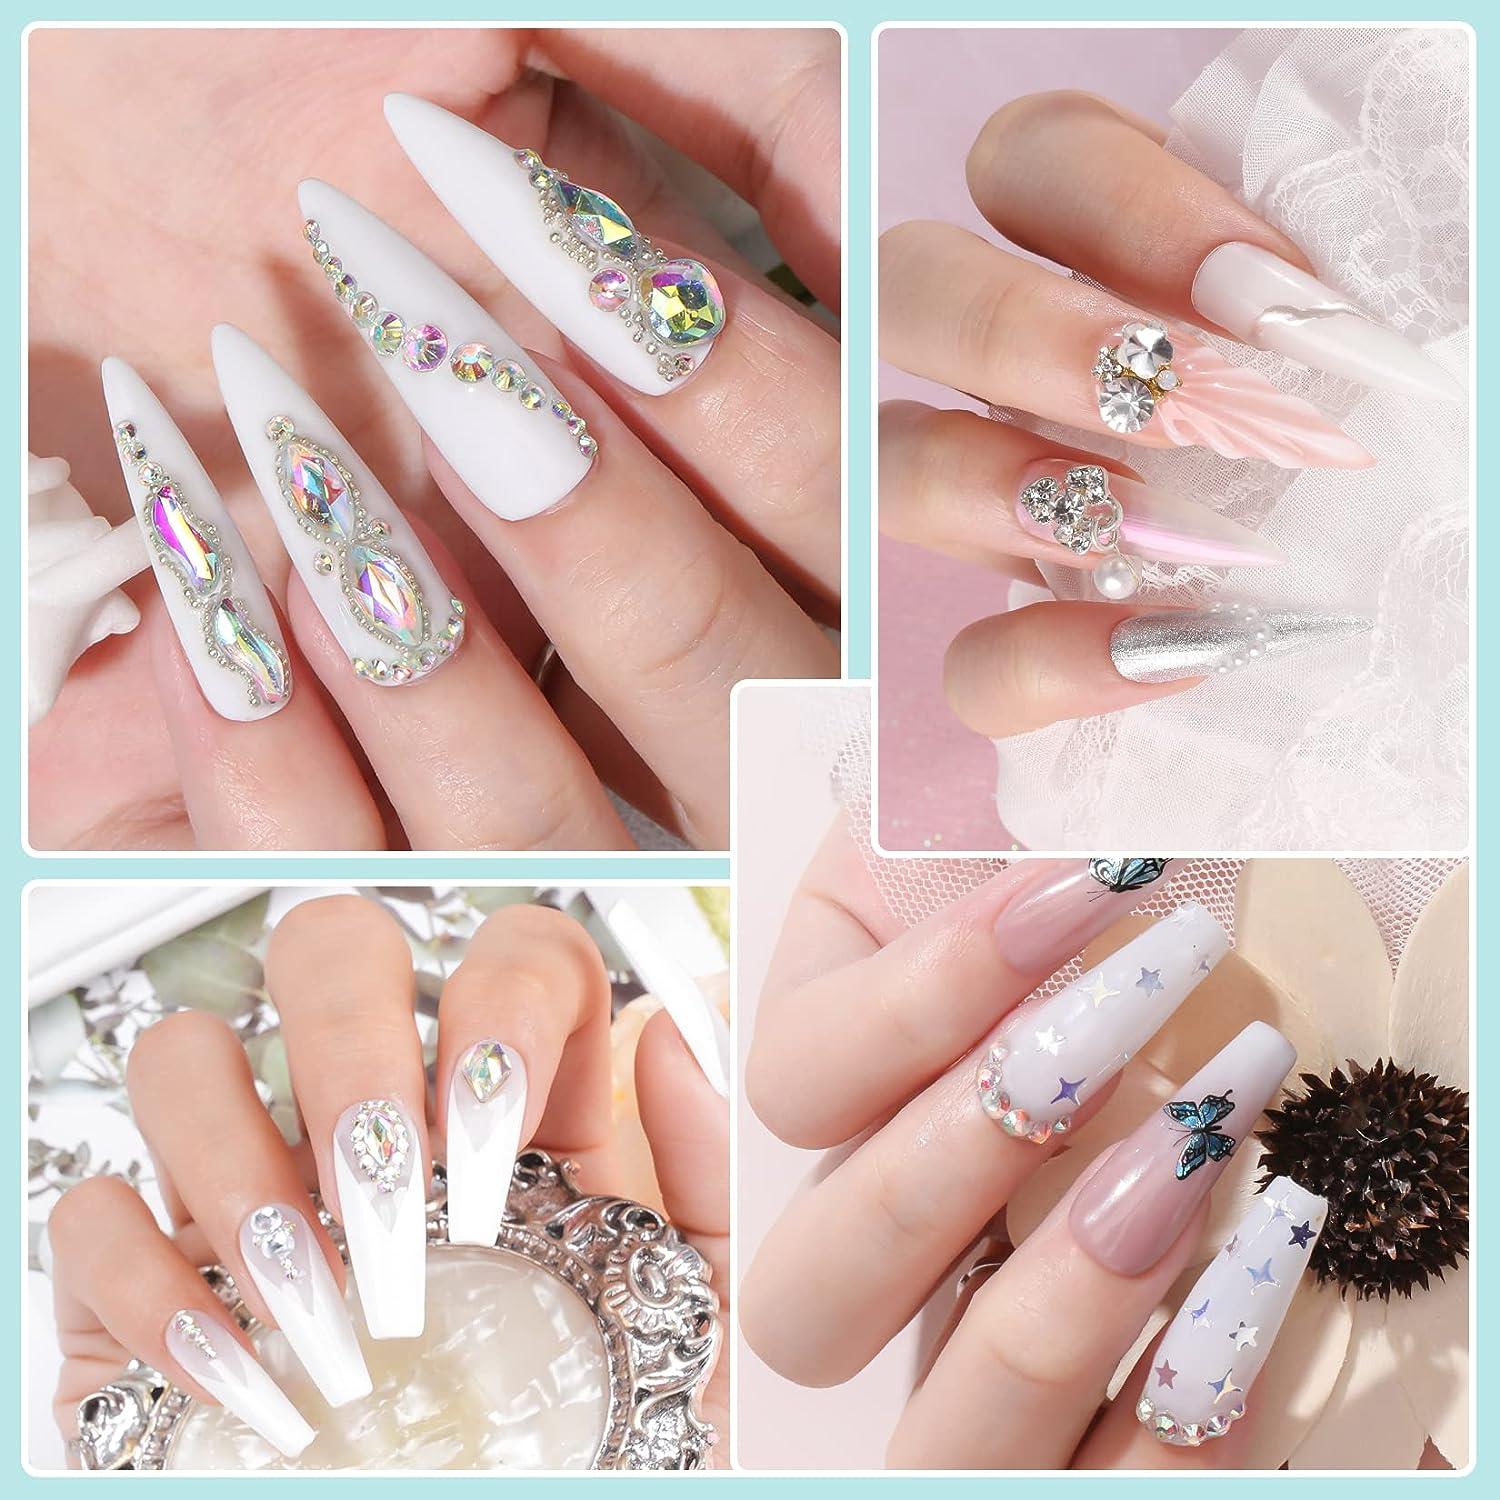 30 Fantastic French Manicure Designs - Best French Manicure Ideas - Pretty  Designs | French nail designs, French manicure nails, Cute nails